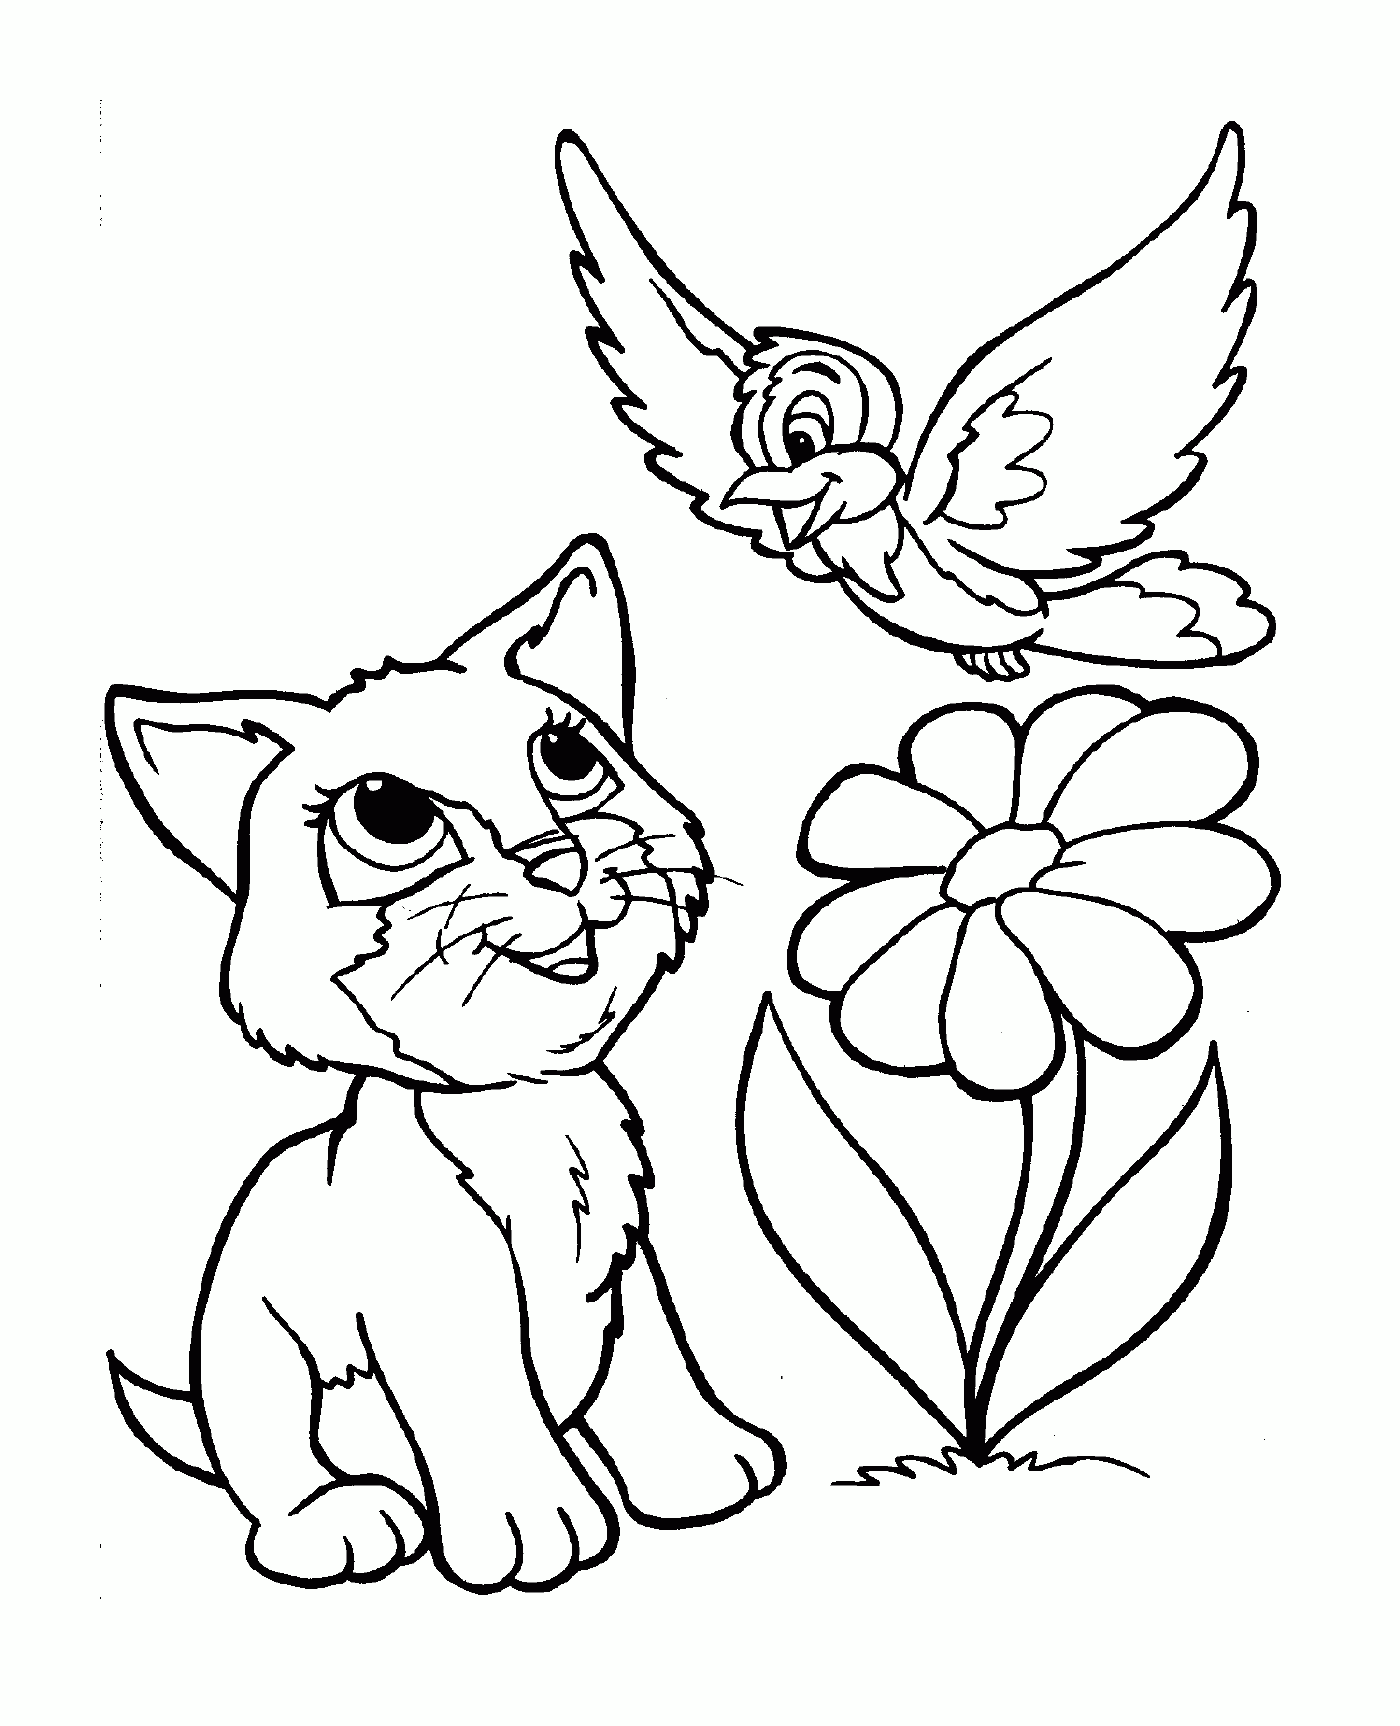  A friendly cat with a bird sitting next to a flower 